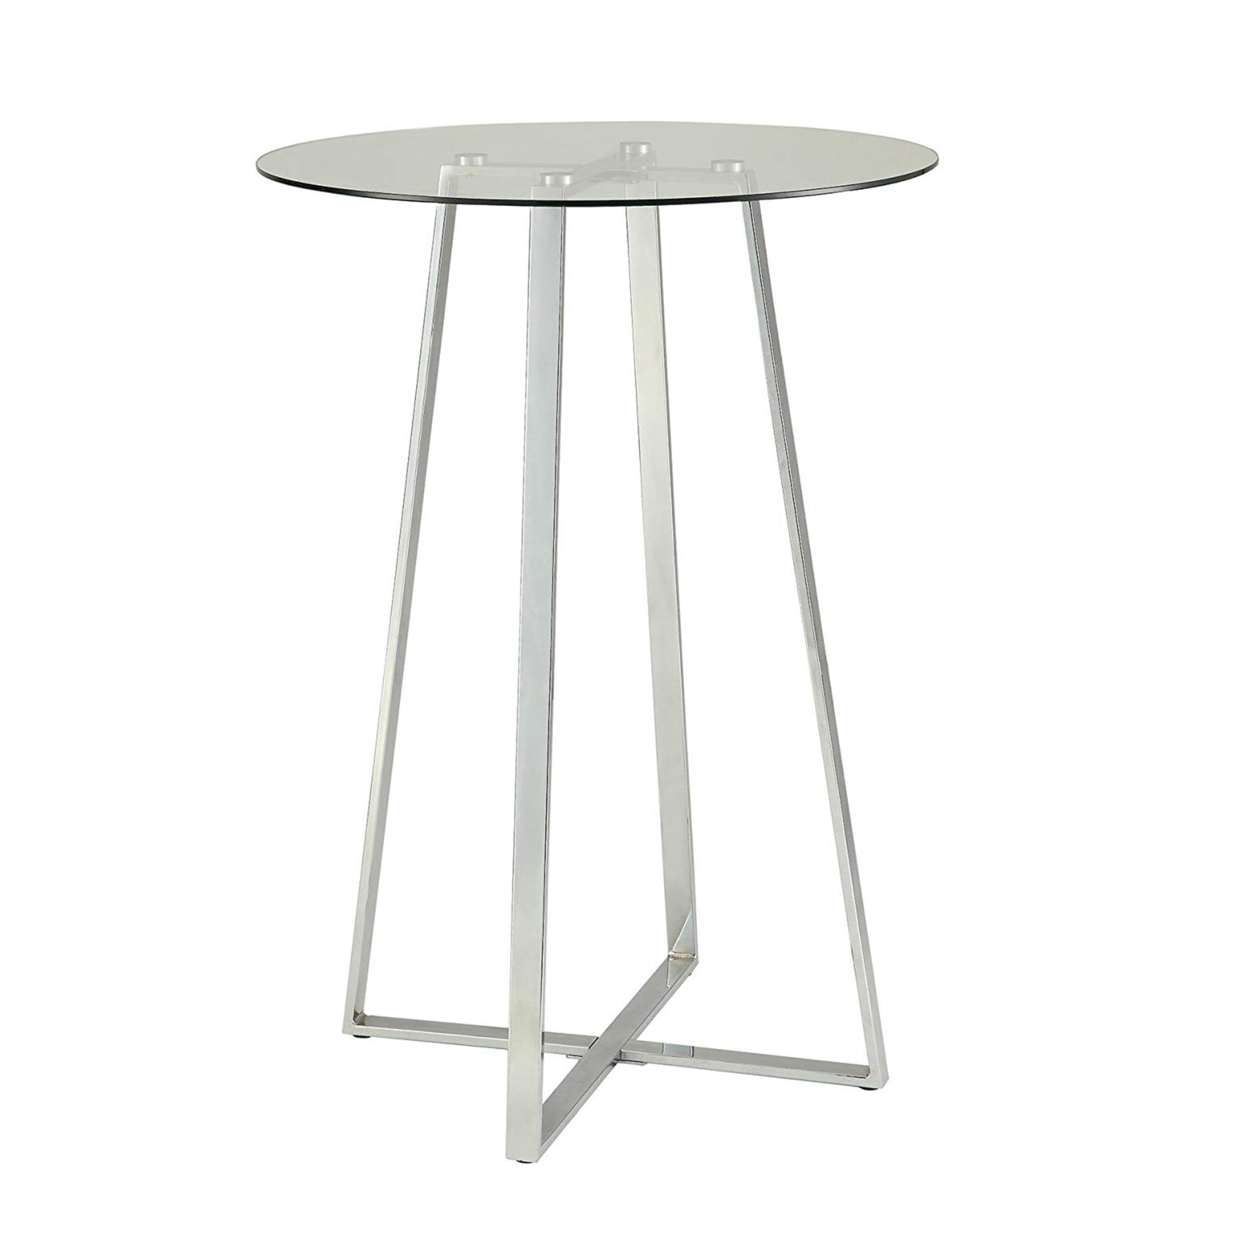 Round Glass Top Metal Frame Bar Table With Angled Legs, Silver And Clear- Saltoro Sherpi